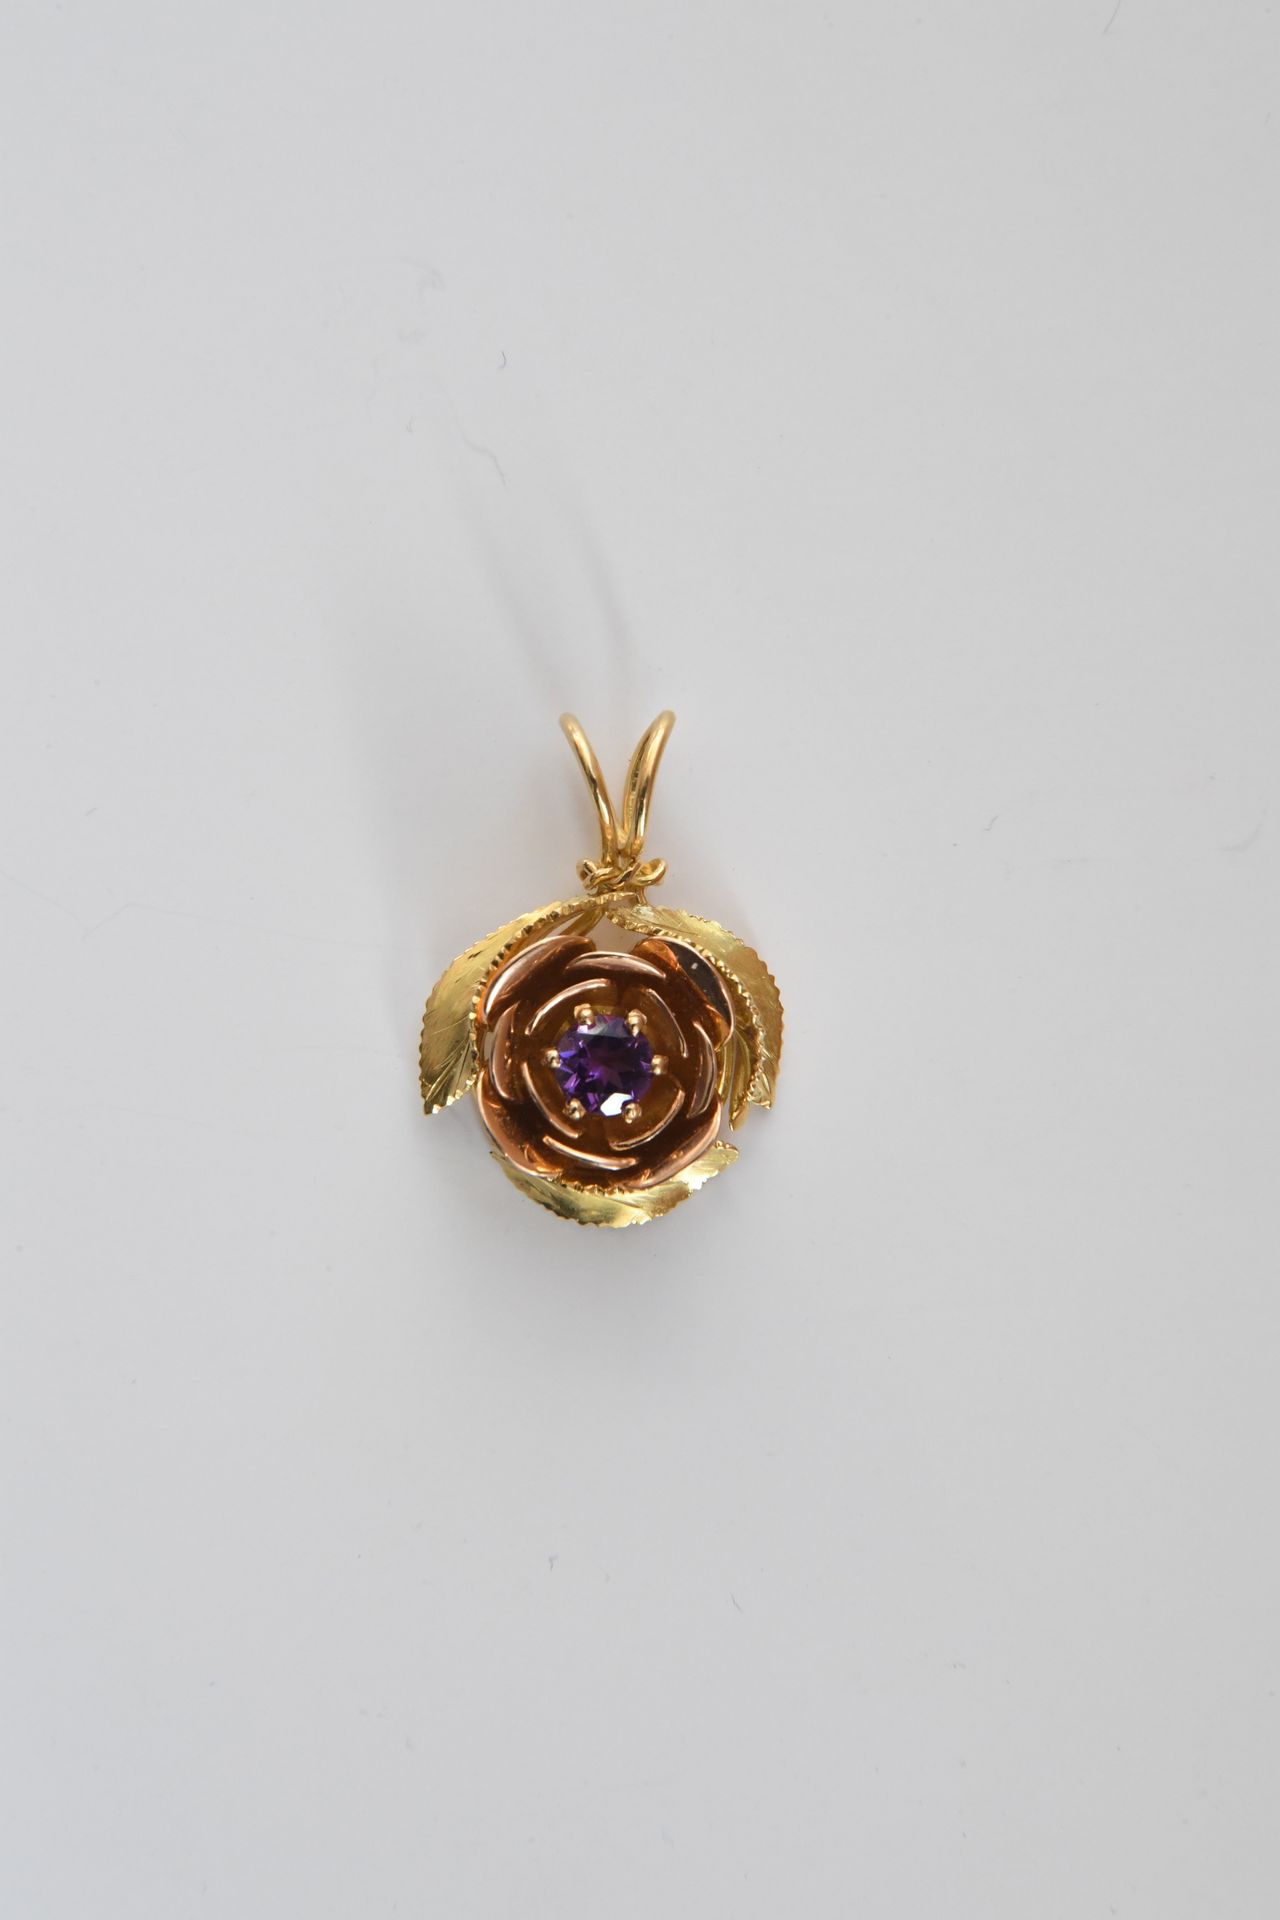 Null Gold pendant 750°°° worked in the shape of a rose hip flower decorated in i&hellip;